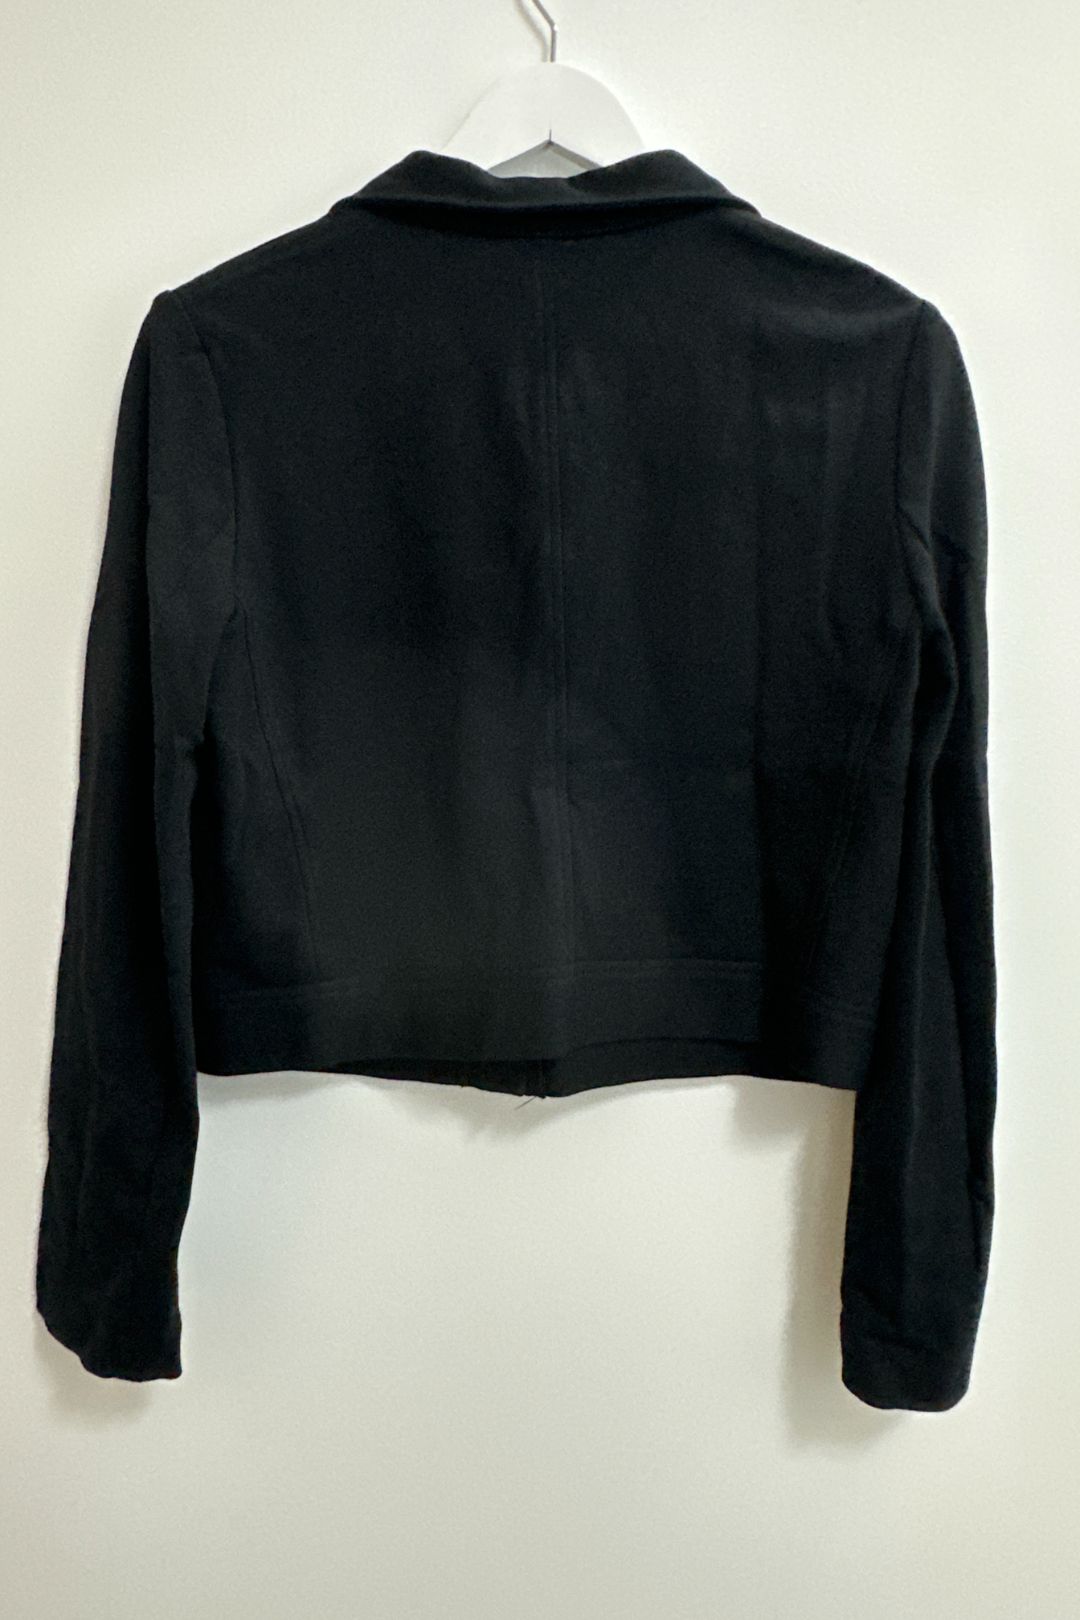 George Black Jacket With Covered Buttons